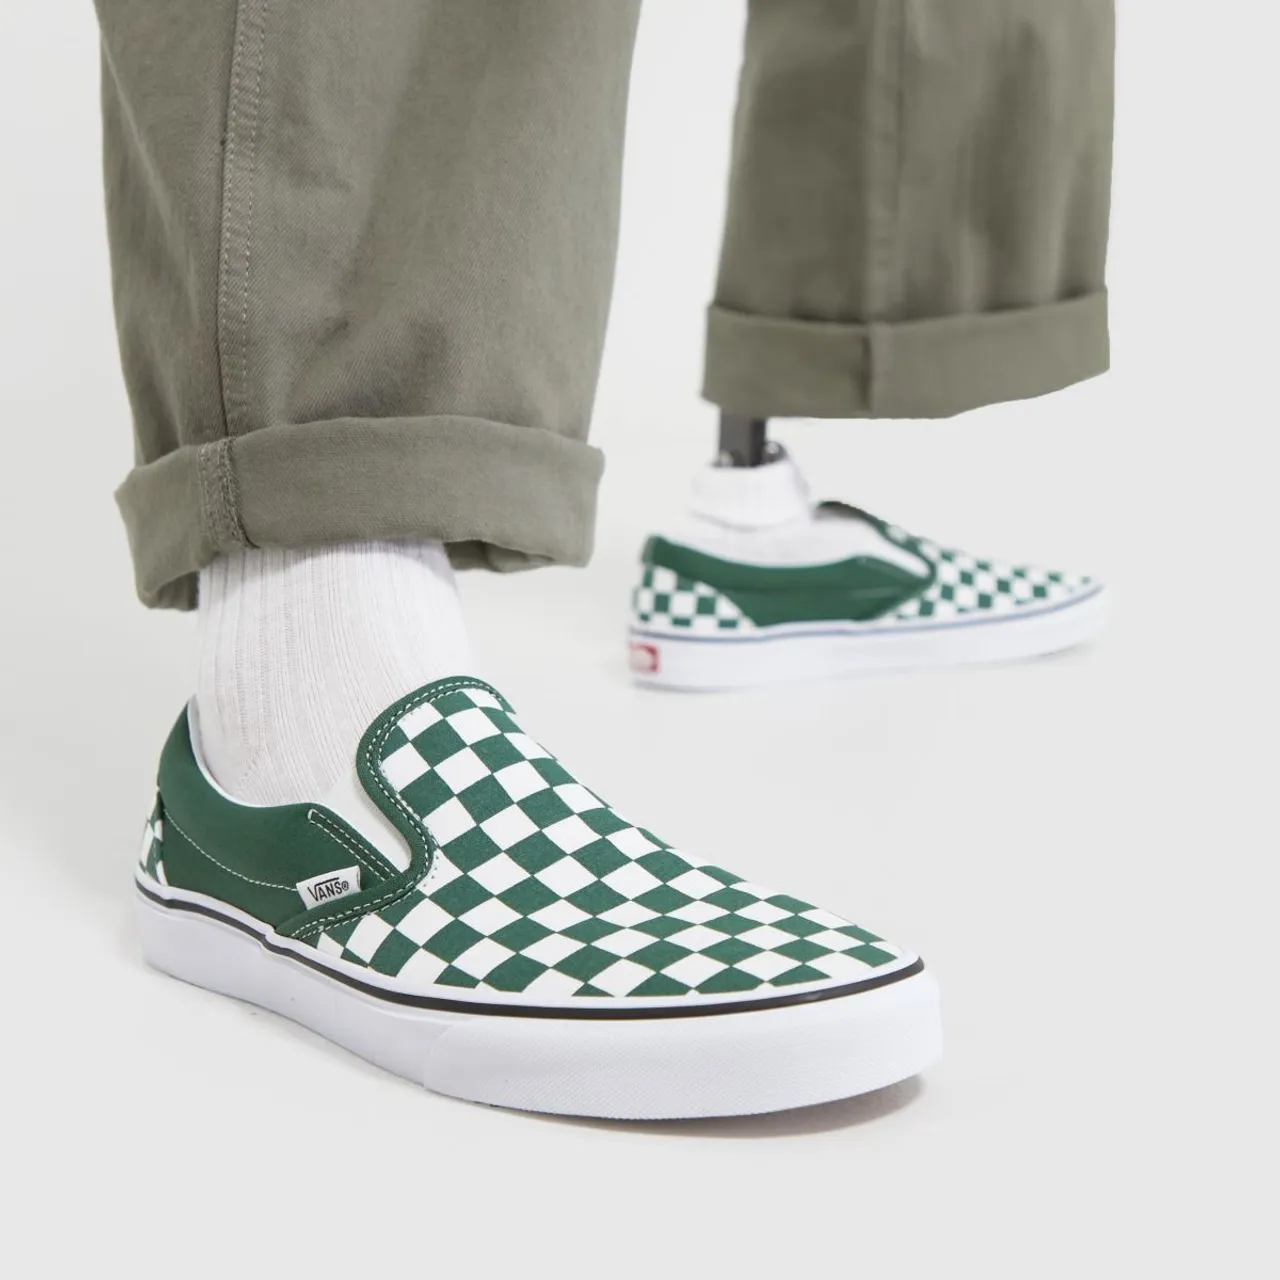 Vans Classic Slip On Trainers In Green